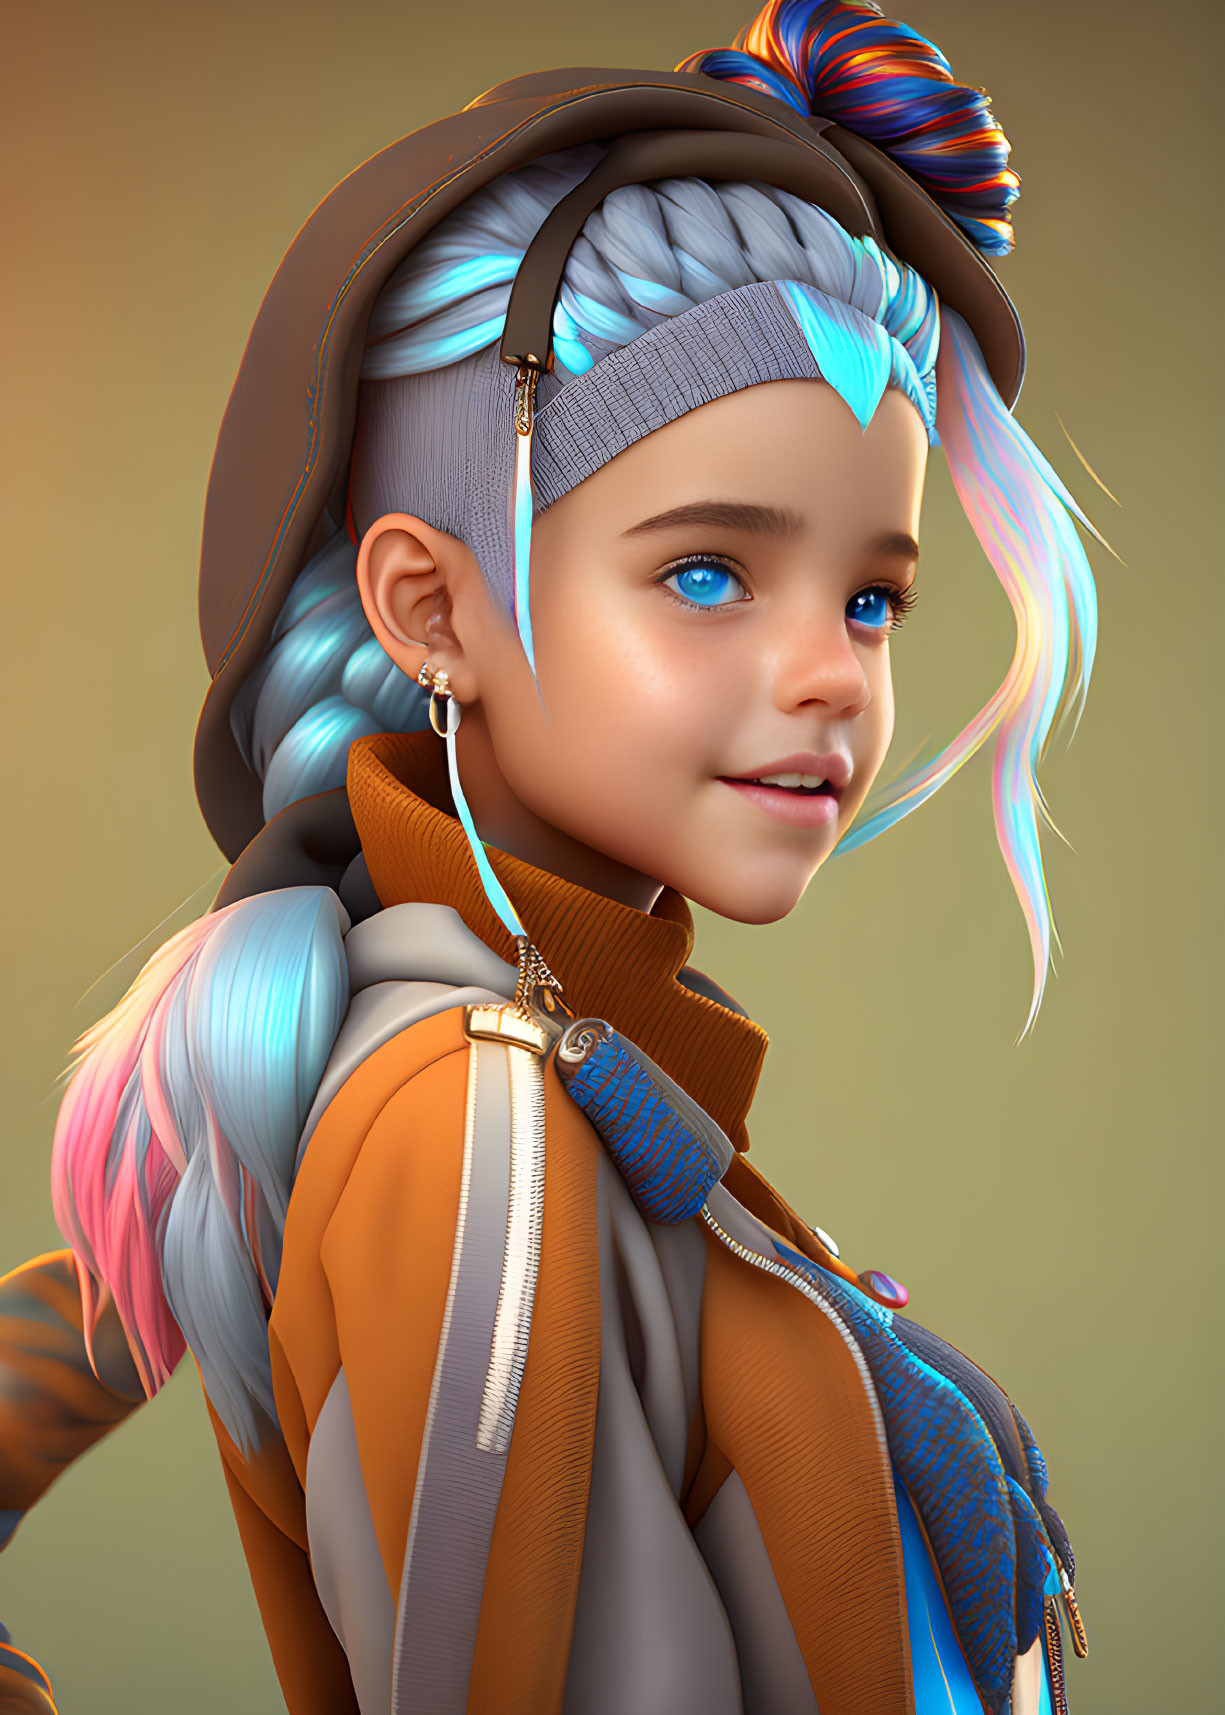 Young girl with blue eyes & colorful braid in digital artwork